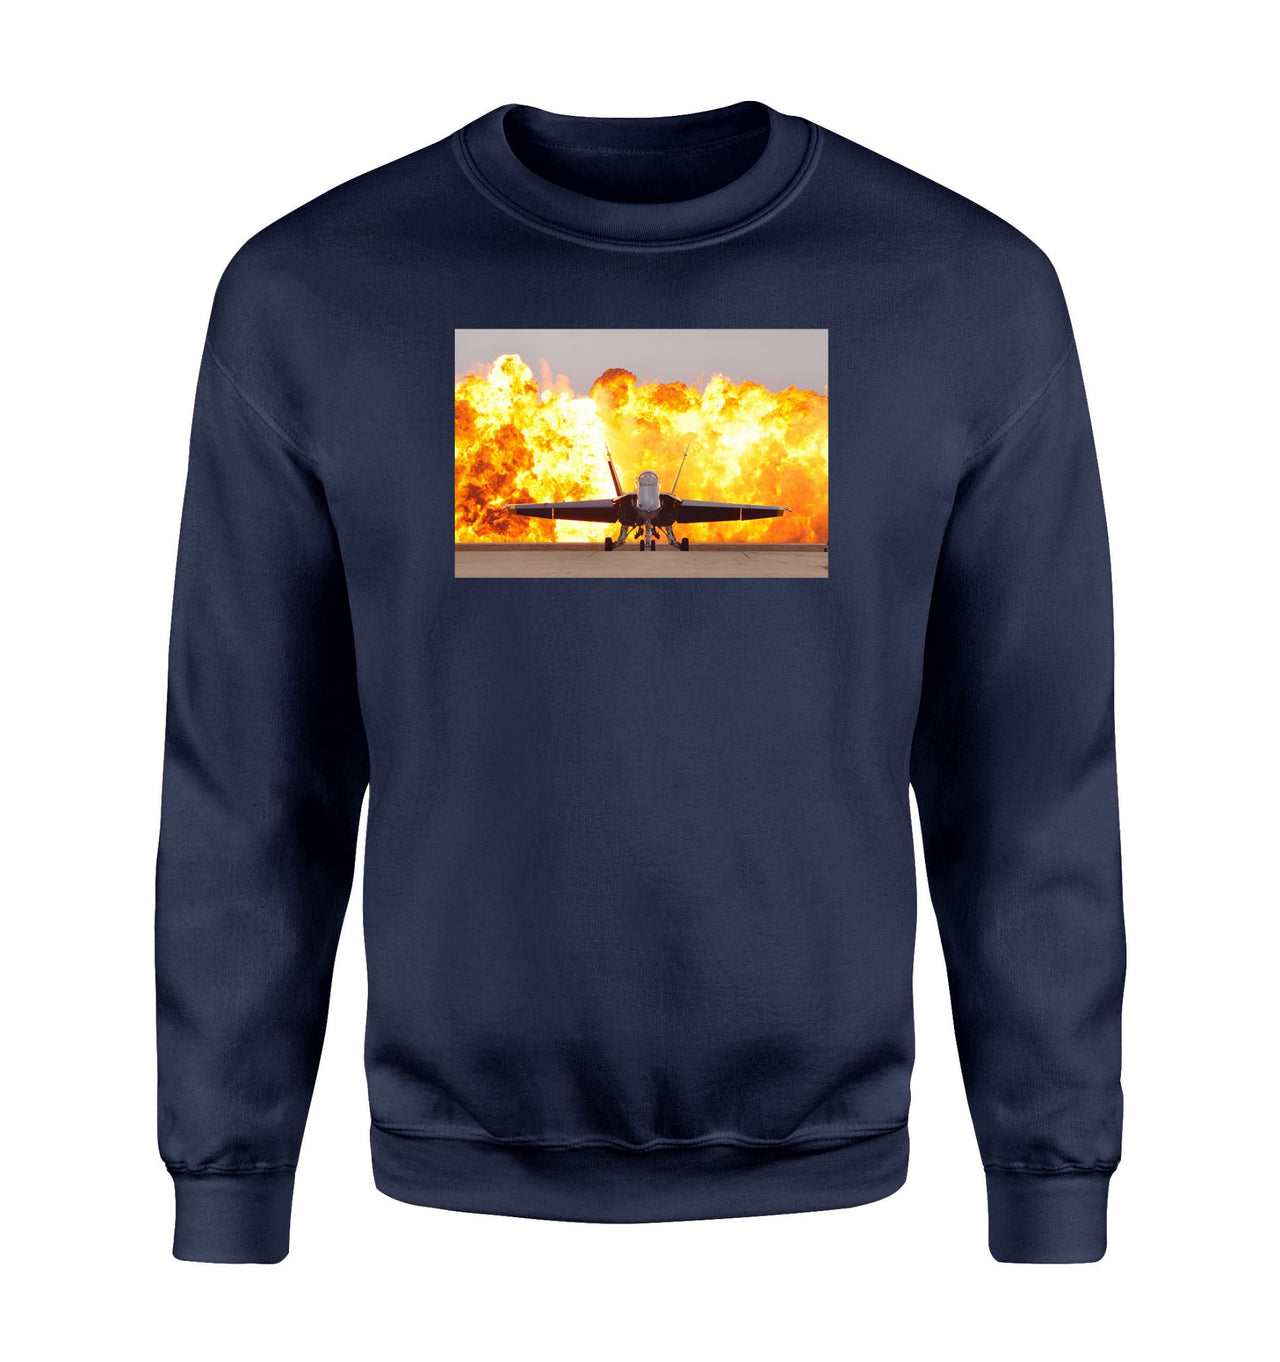 Face to Face with Air Force Jet & Flames Designed Sweatshirts